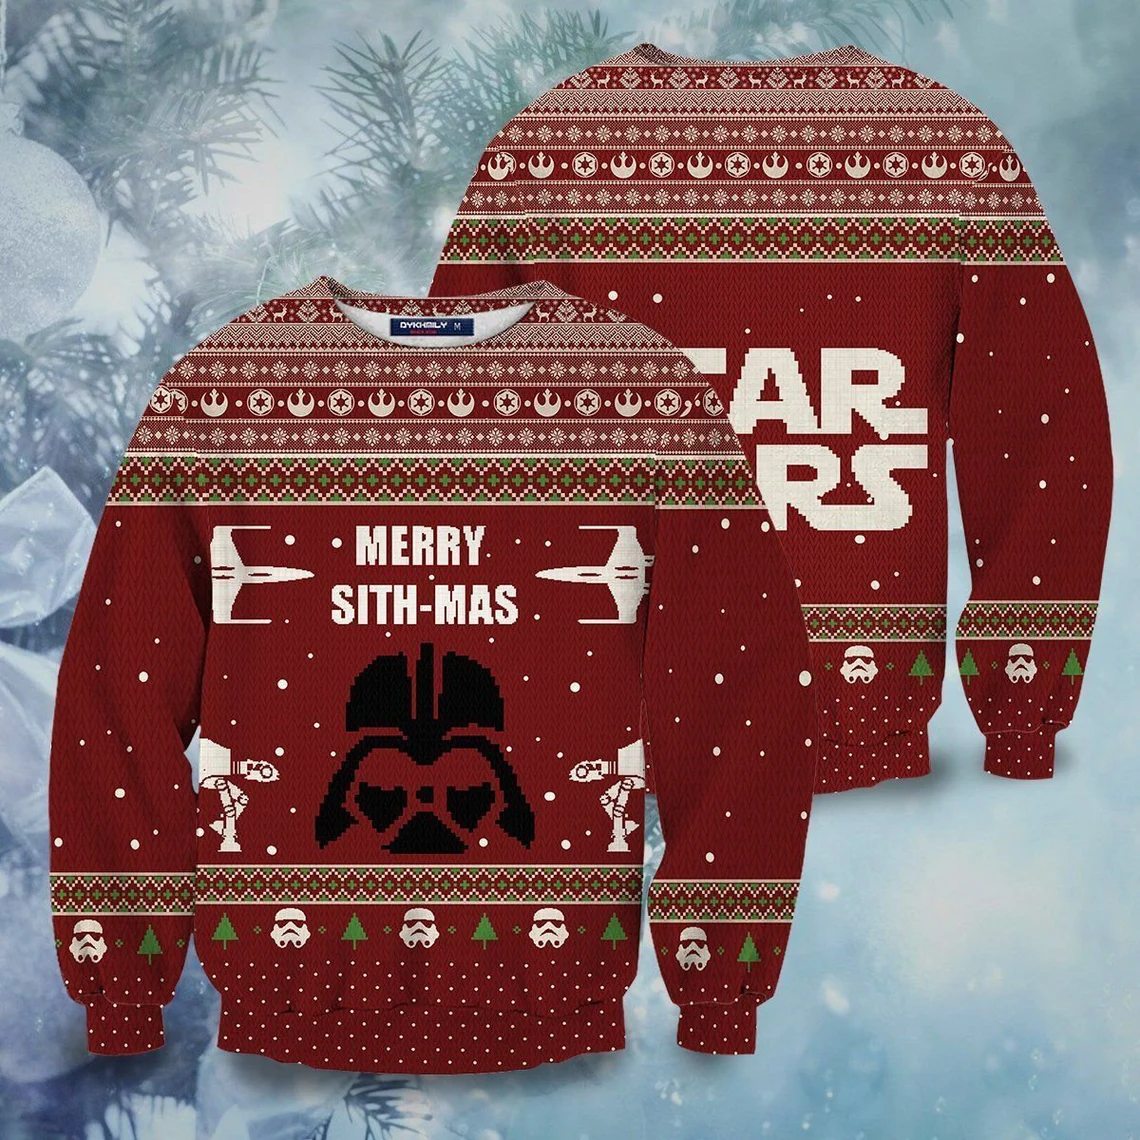 Merry Sith-Mas Knitted Sweater Ugly Christmas Shirt